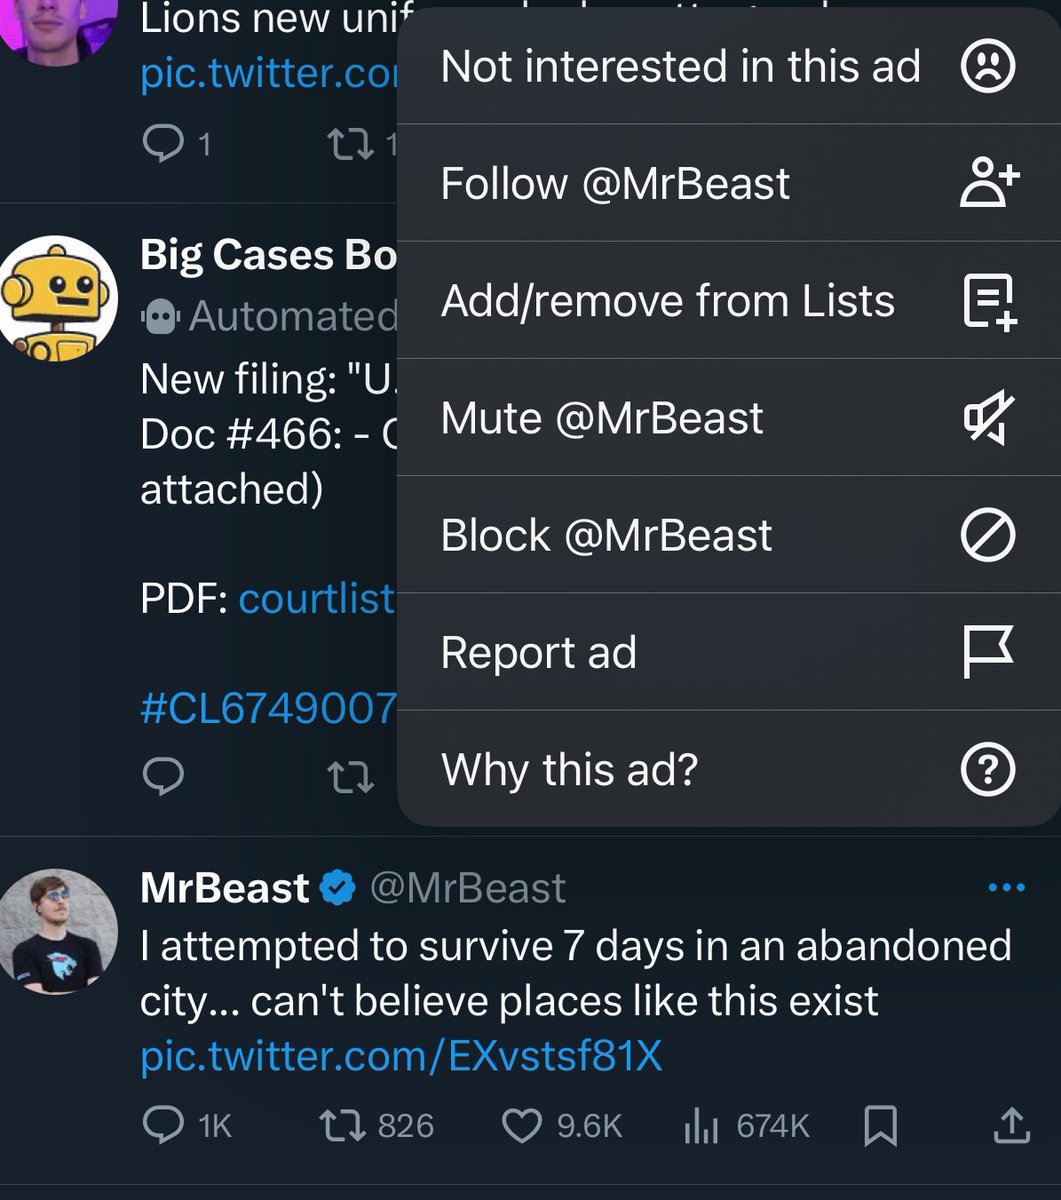 It's so funny that Elon musk pays for mr. Beast's advertising on Twitter using unlabelled ads so that he can pay Mr. Beast money from the creator program to repost stuff from YouTube